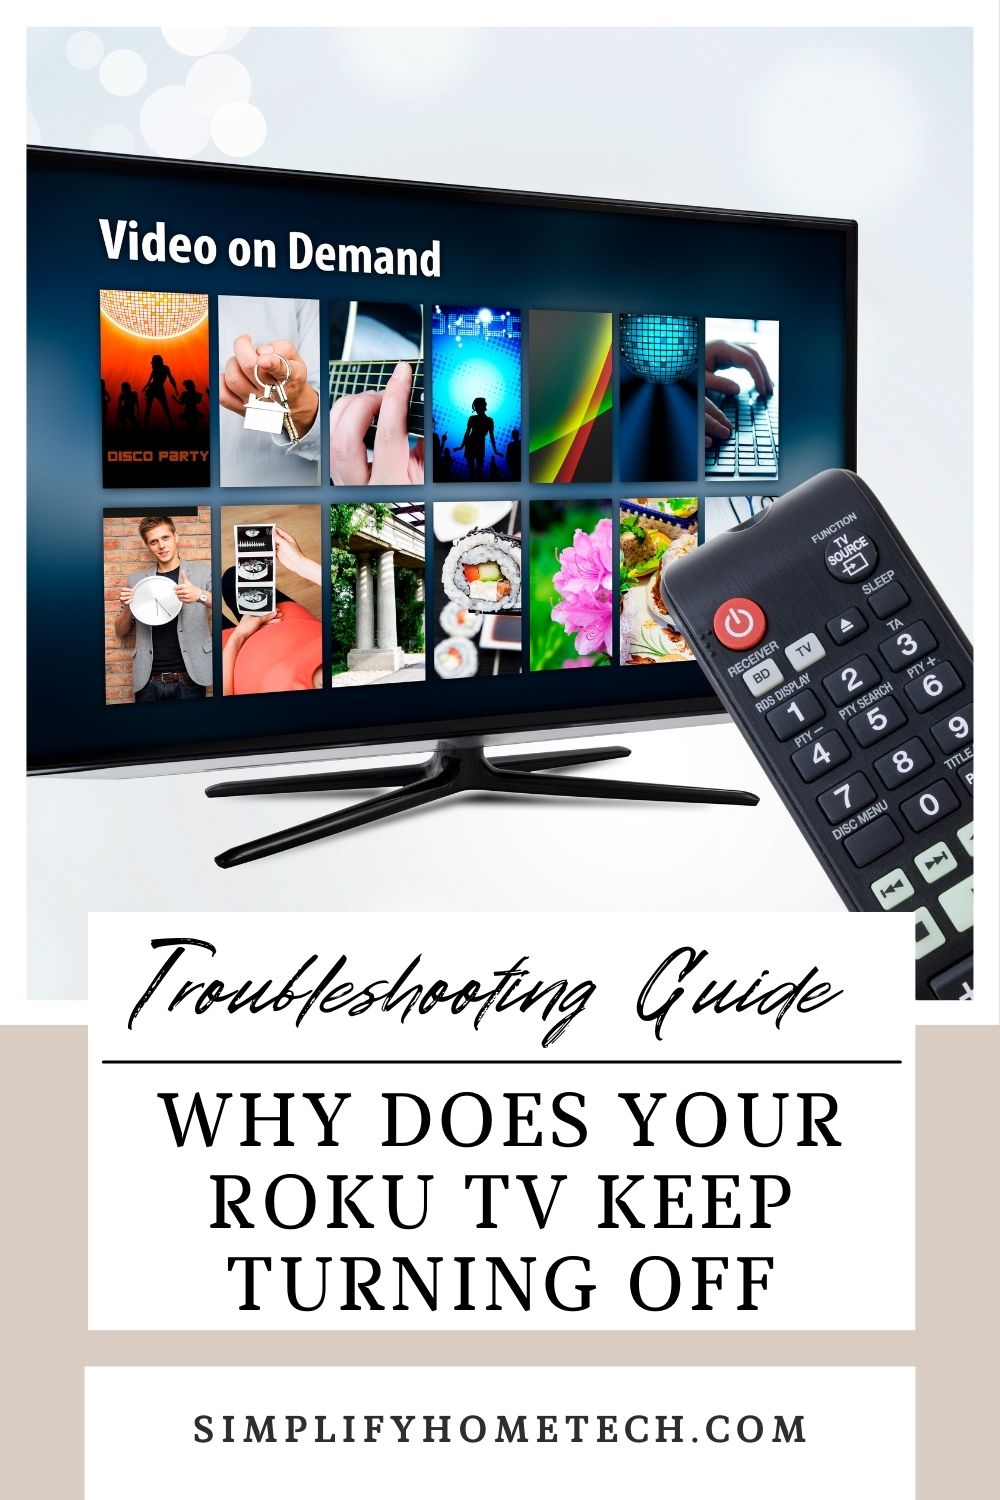 Why Does Your Roku TV Keep Turning Off - Troubleshooting Guide